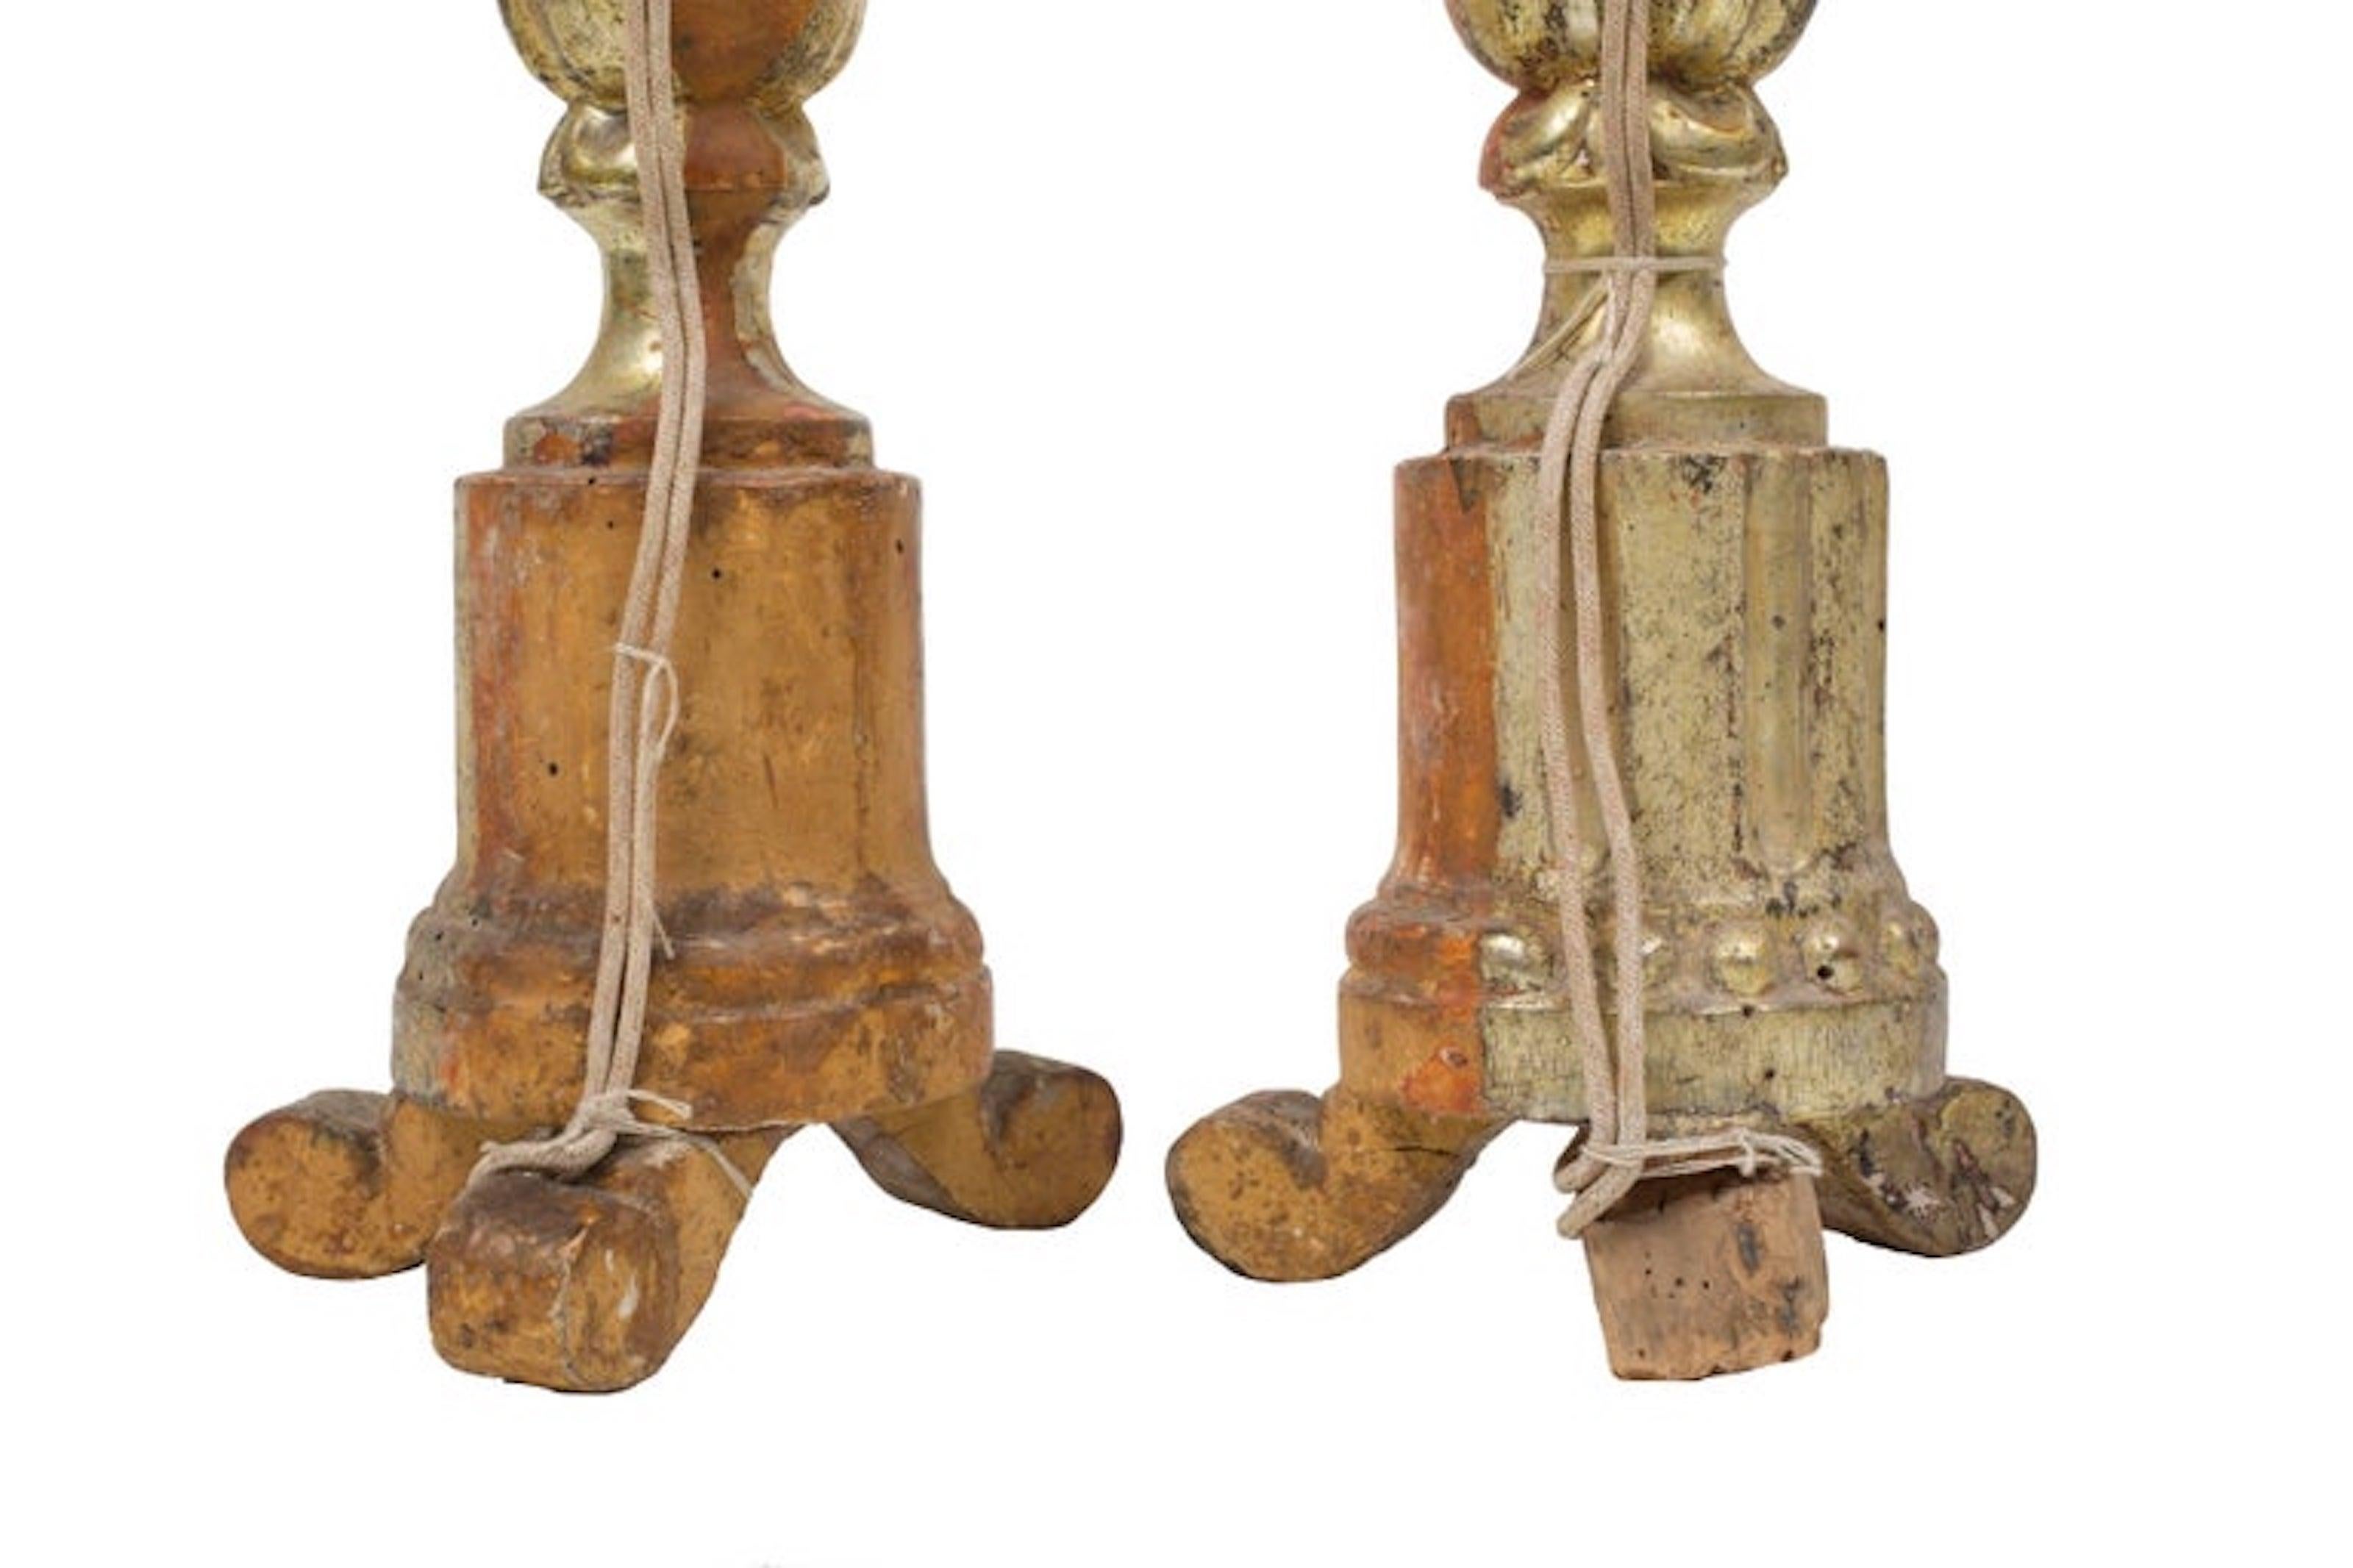 Pair of 19th Century Italian Candlesticks with beautiful original gild from Italian altar of the Church. Front is gilded while the back the original wood because only the front was seen from the altar. Cork and wood like material legs show